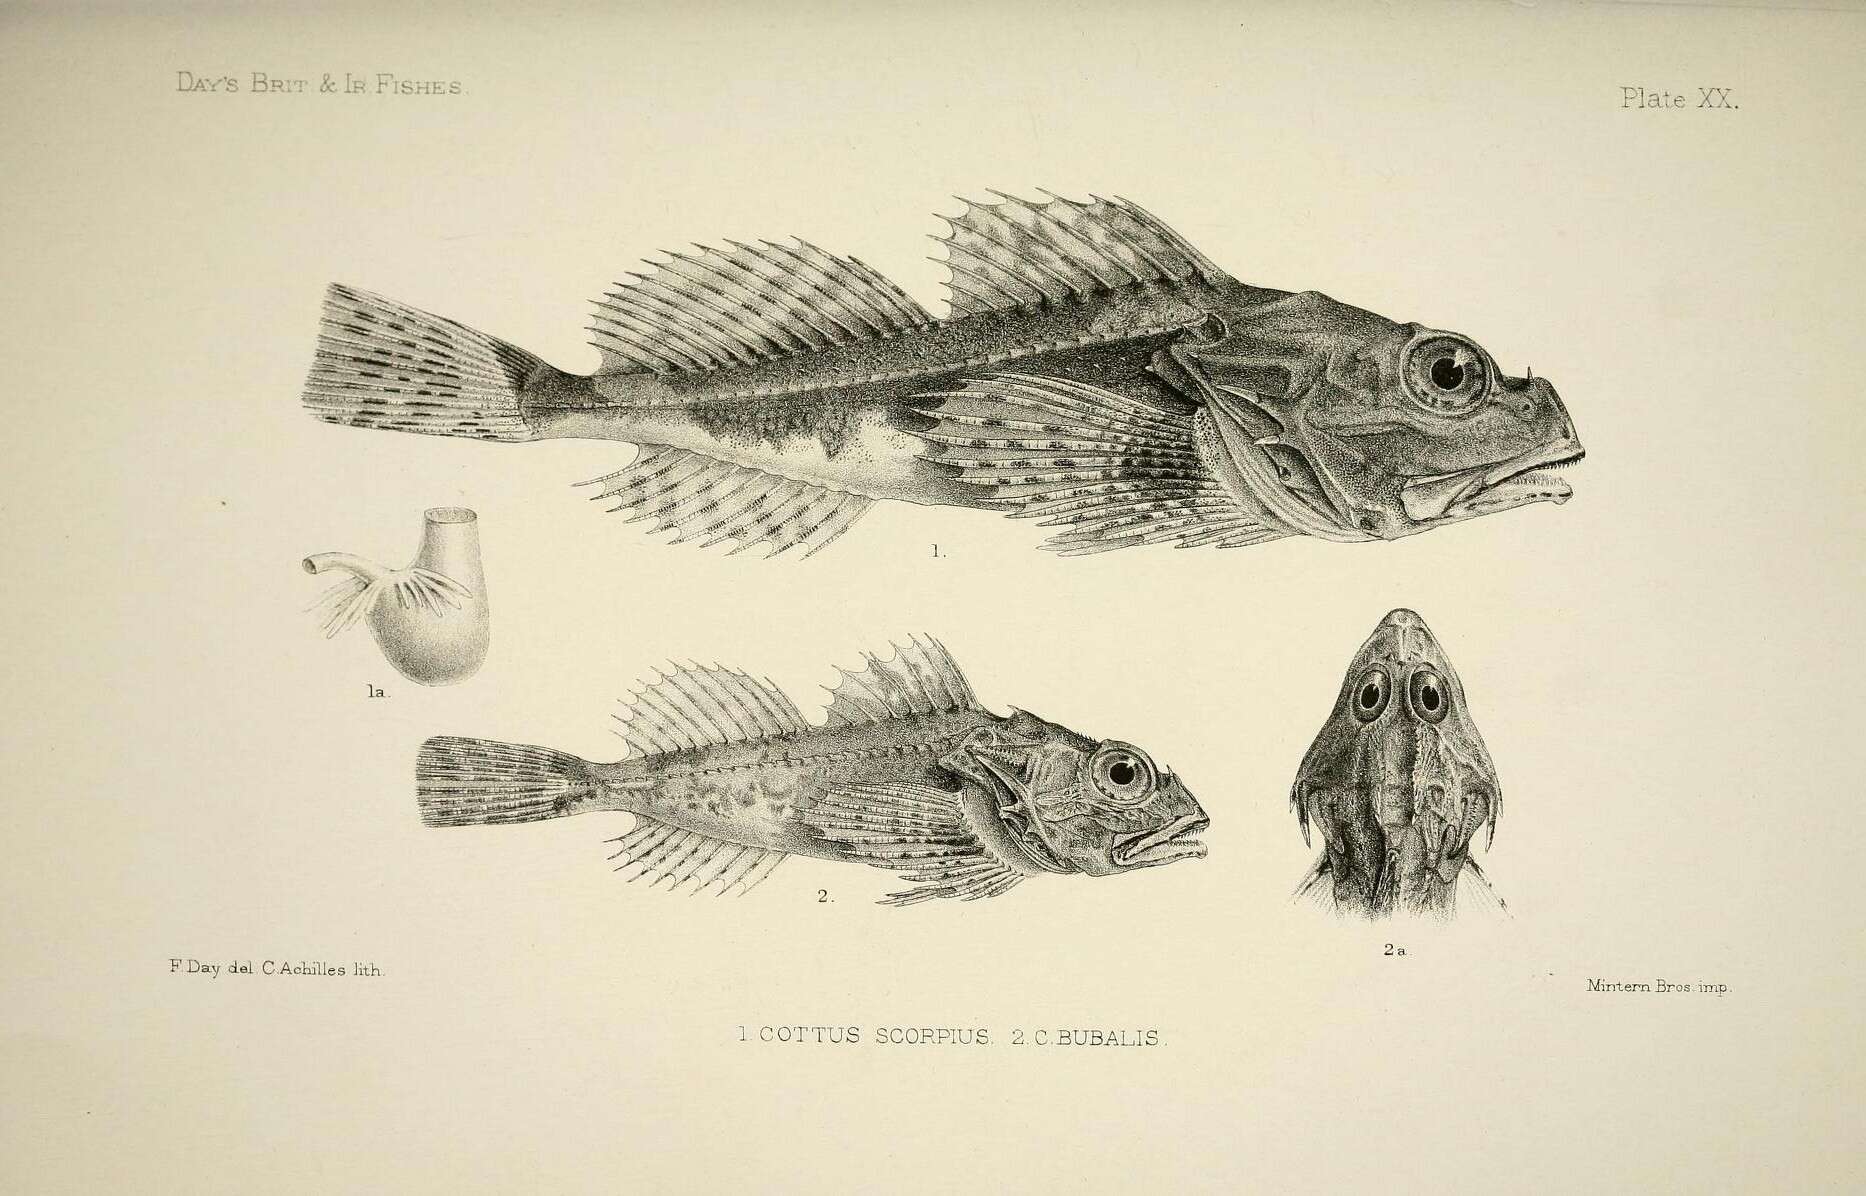 Image of Shorthorn sculpin